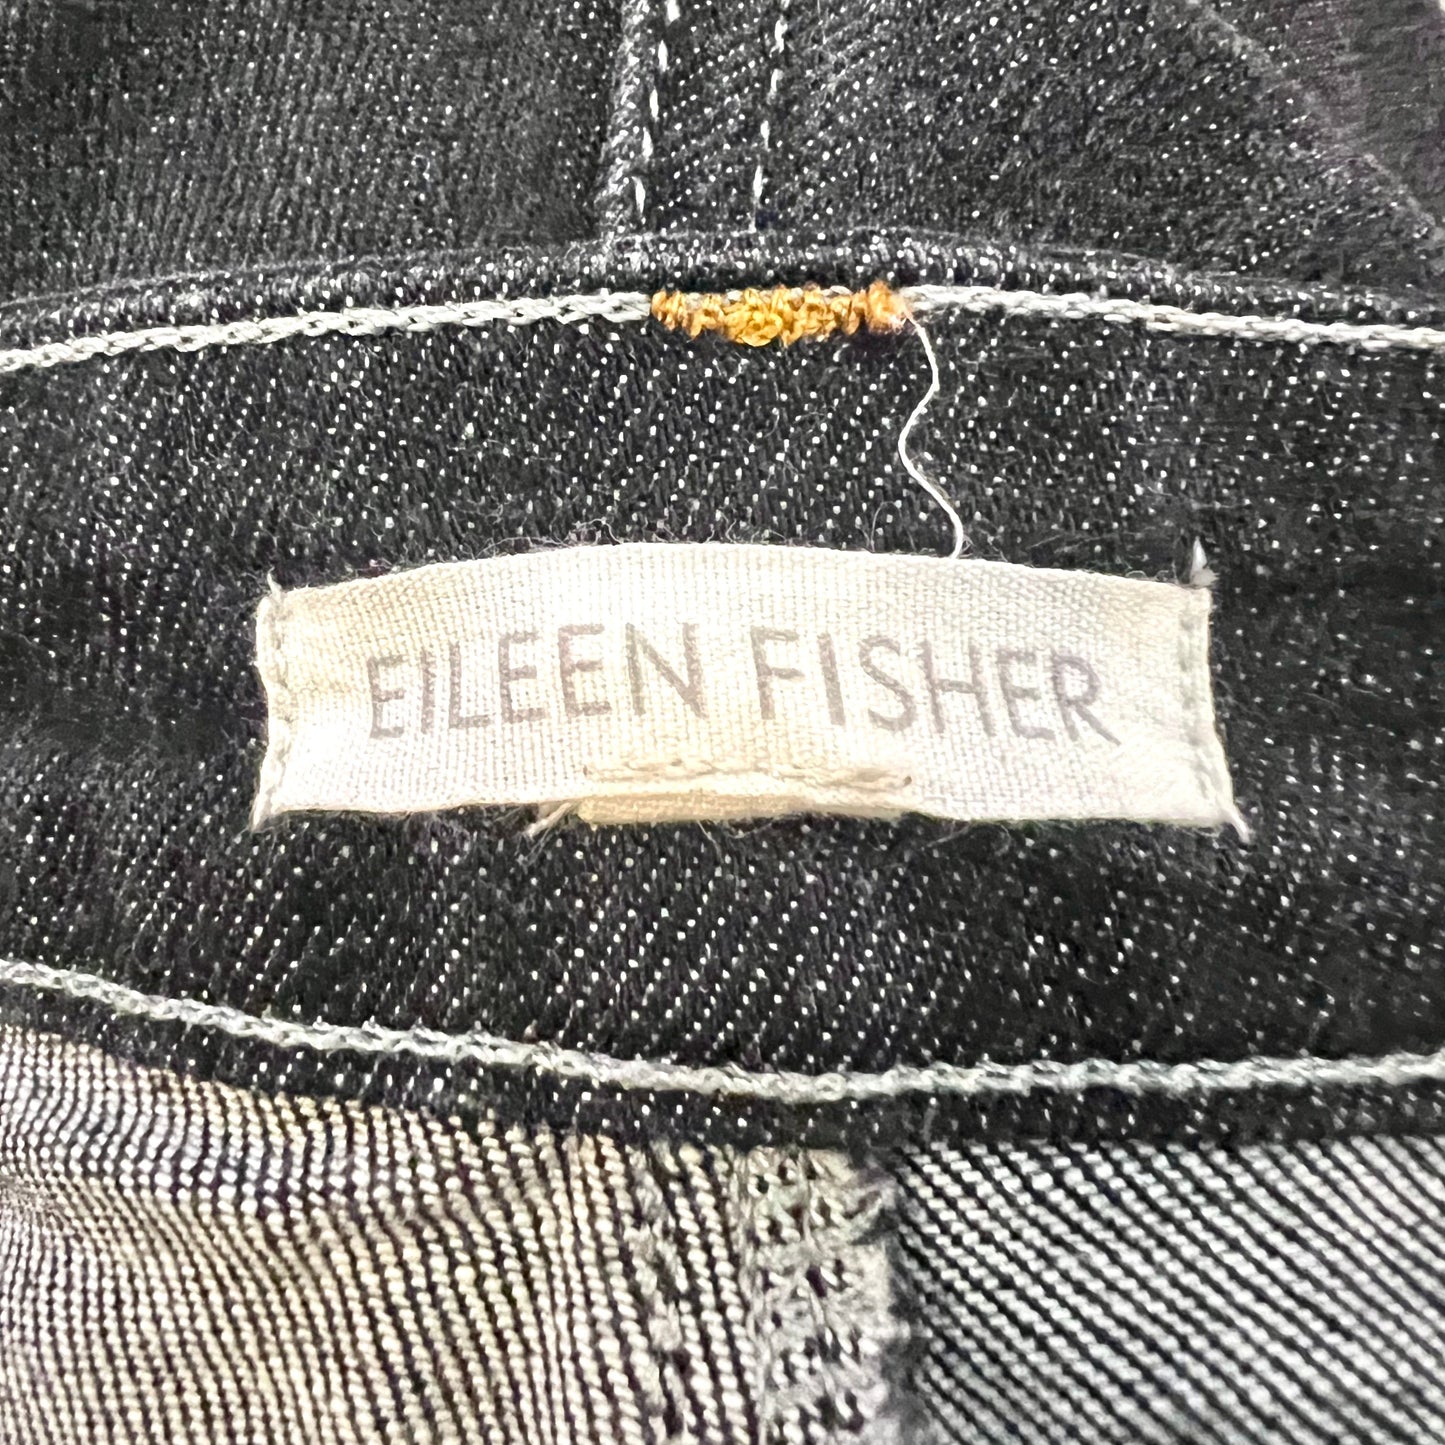 Jeans Skinny By Eileen Fisher  Size: 14